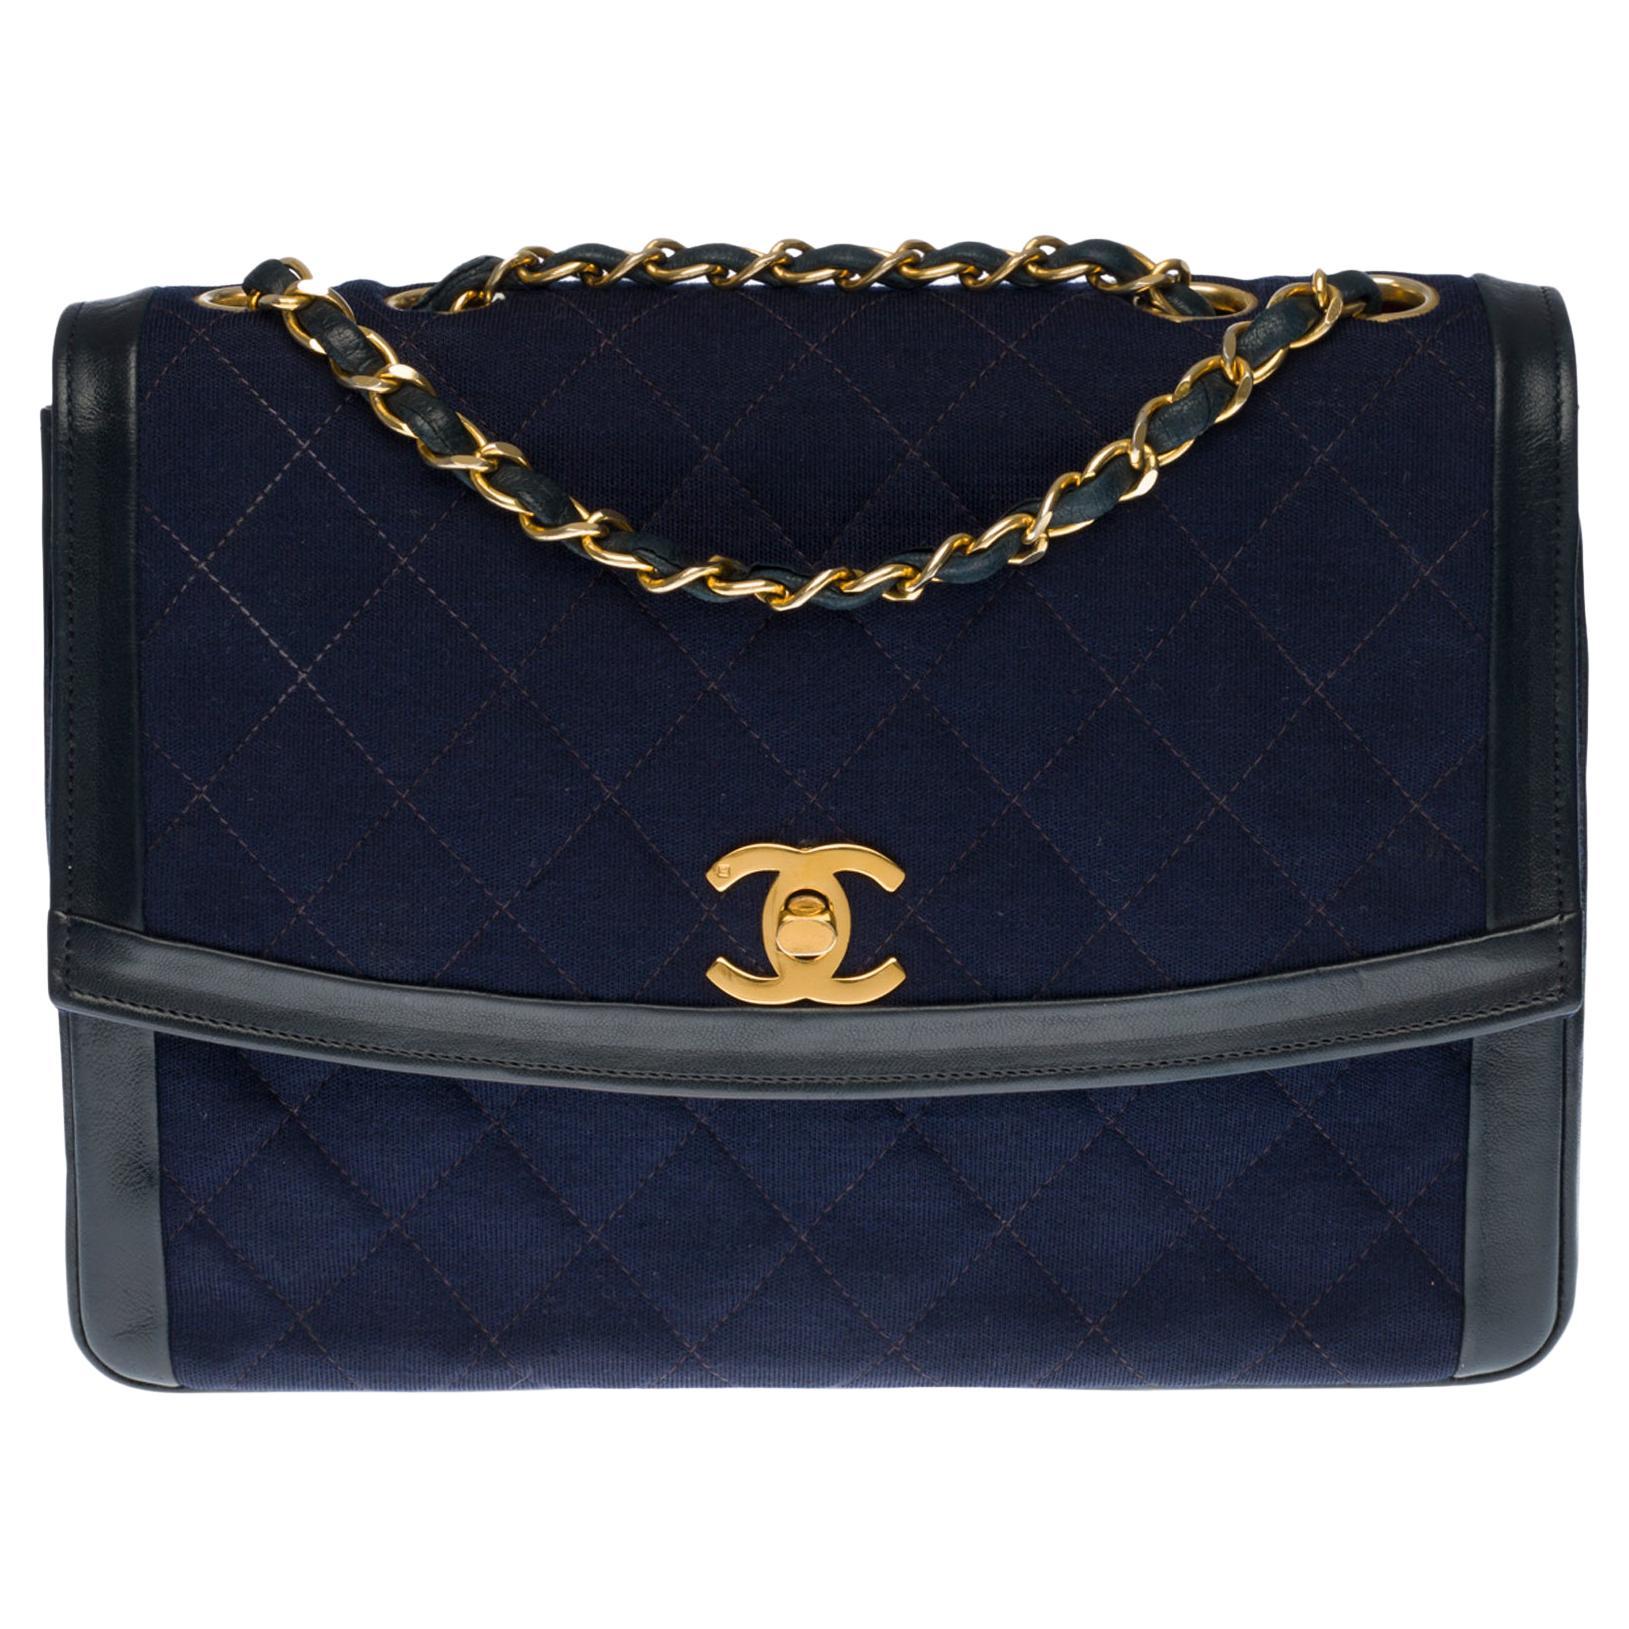 Chanel Classique two-material bag in navy blue quilted jersey and leather, GHW